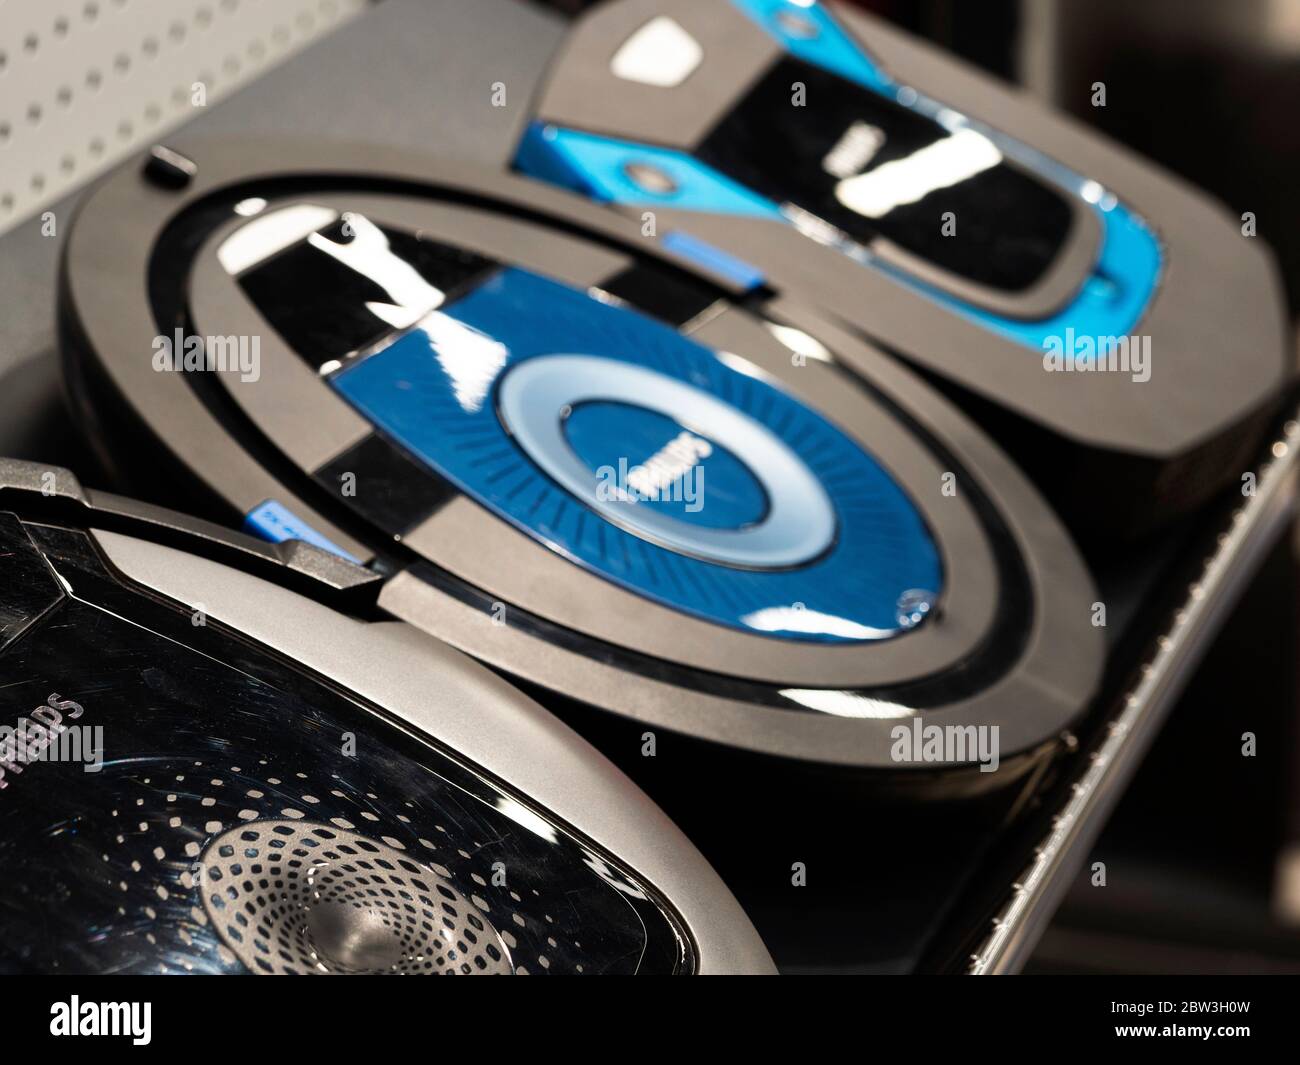 Kiev, Ukraine. 28th May, 2020. Philips robot vacuum cleaners displayed on a  shelf of a store. Credit: Igor Golovniov/SOPA Images/ZUMA Wire/Alamy Live  News Stock Photo - Alamy